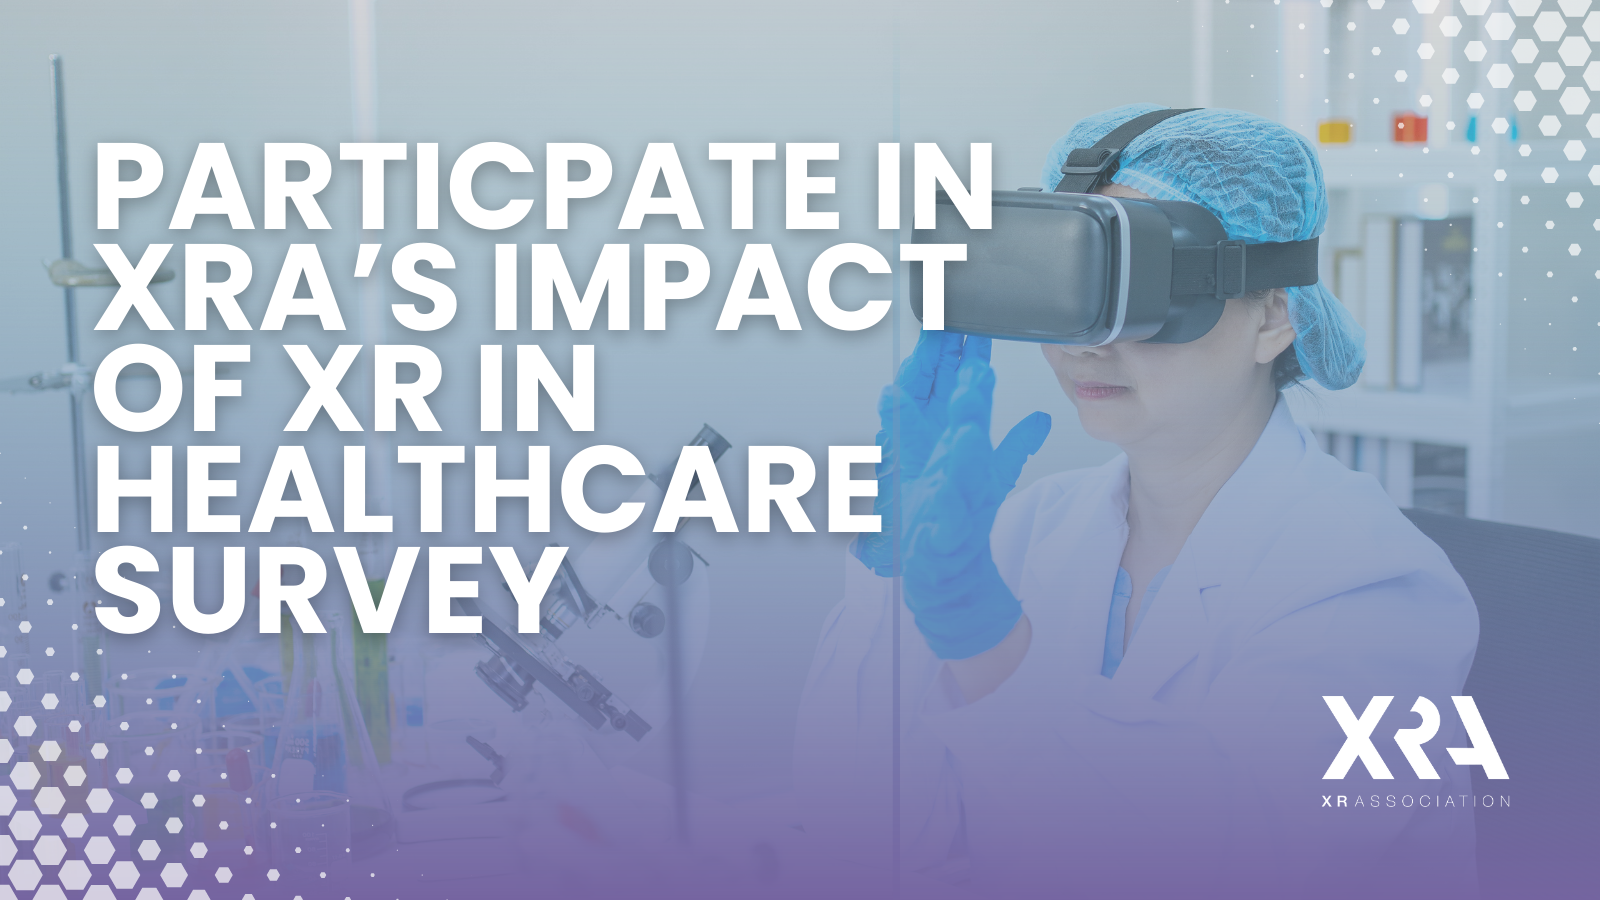 XR ASSOCIATION LAUNCHES SURVEY EXPLORING THE IMPACT OF XR IN HEALTHCARE